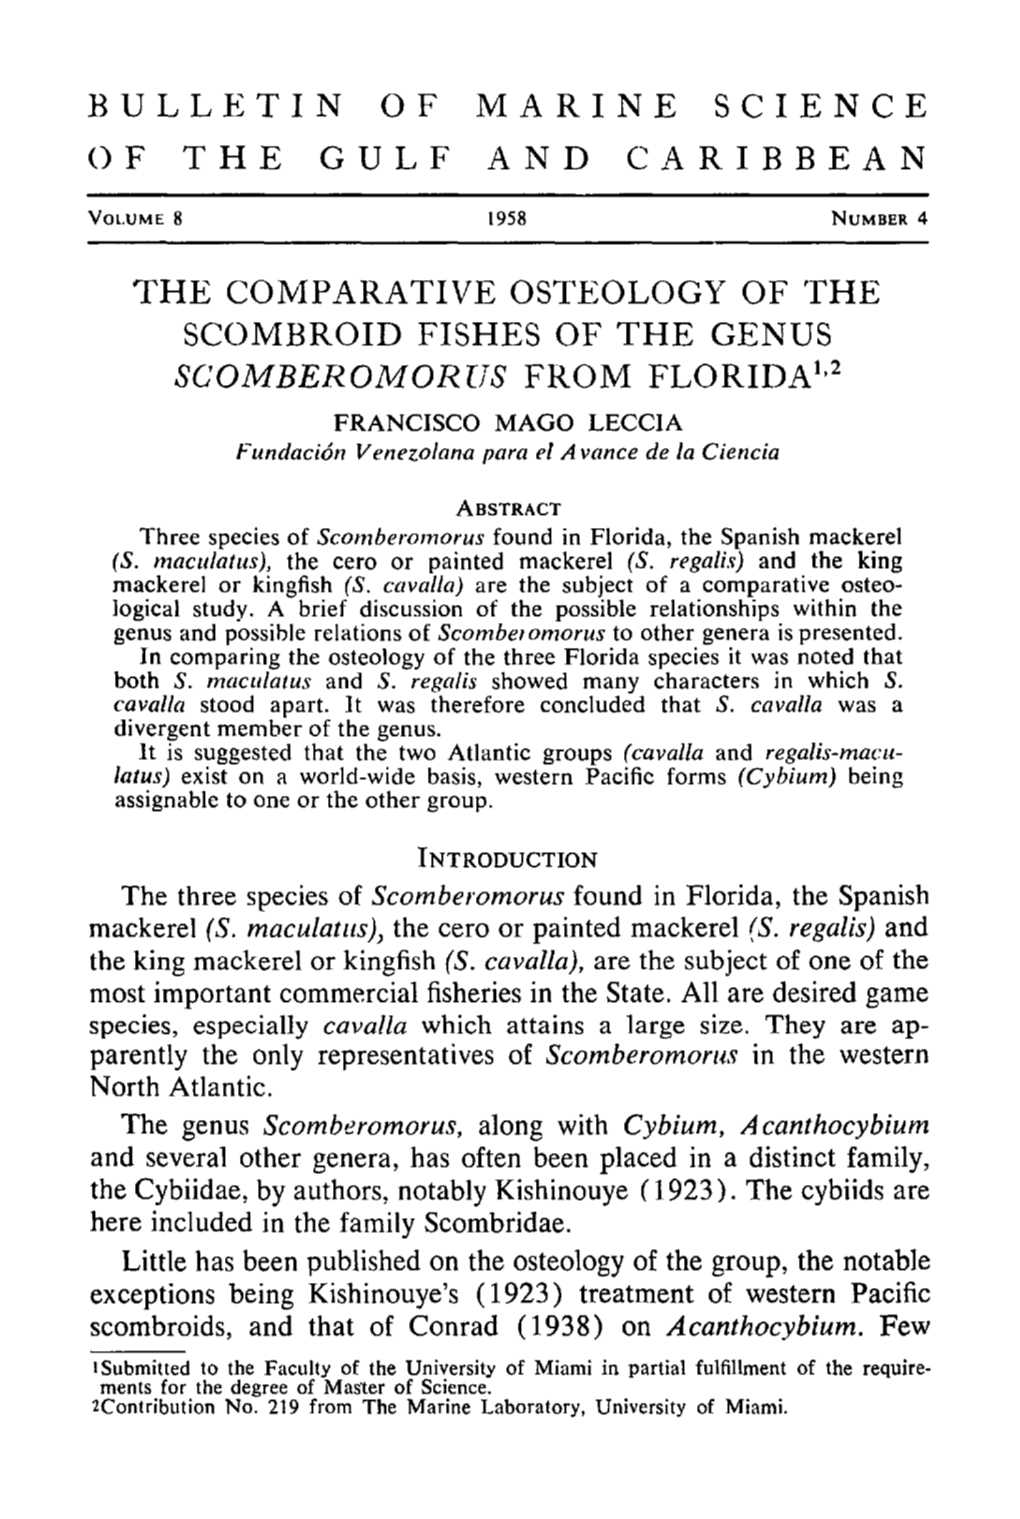 The Comparative Osteology of the Scombroid Fishes of the Genus &lt;I&gt;Scomberomorus&lt;/I&gt; from Florida